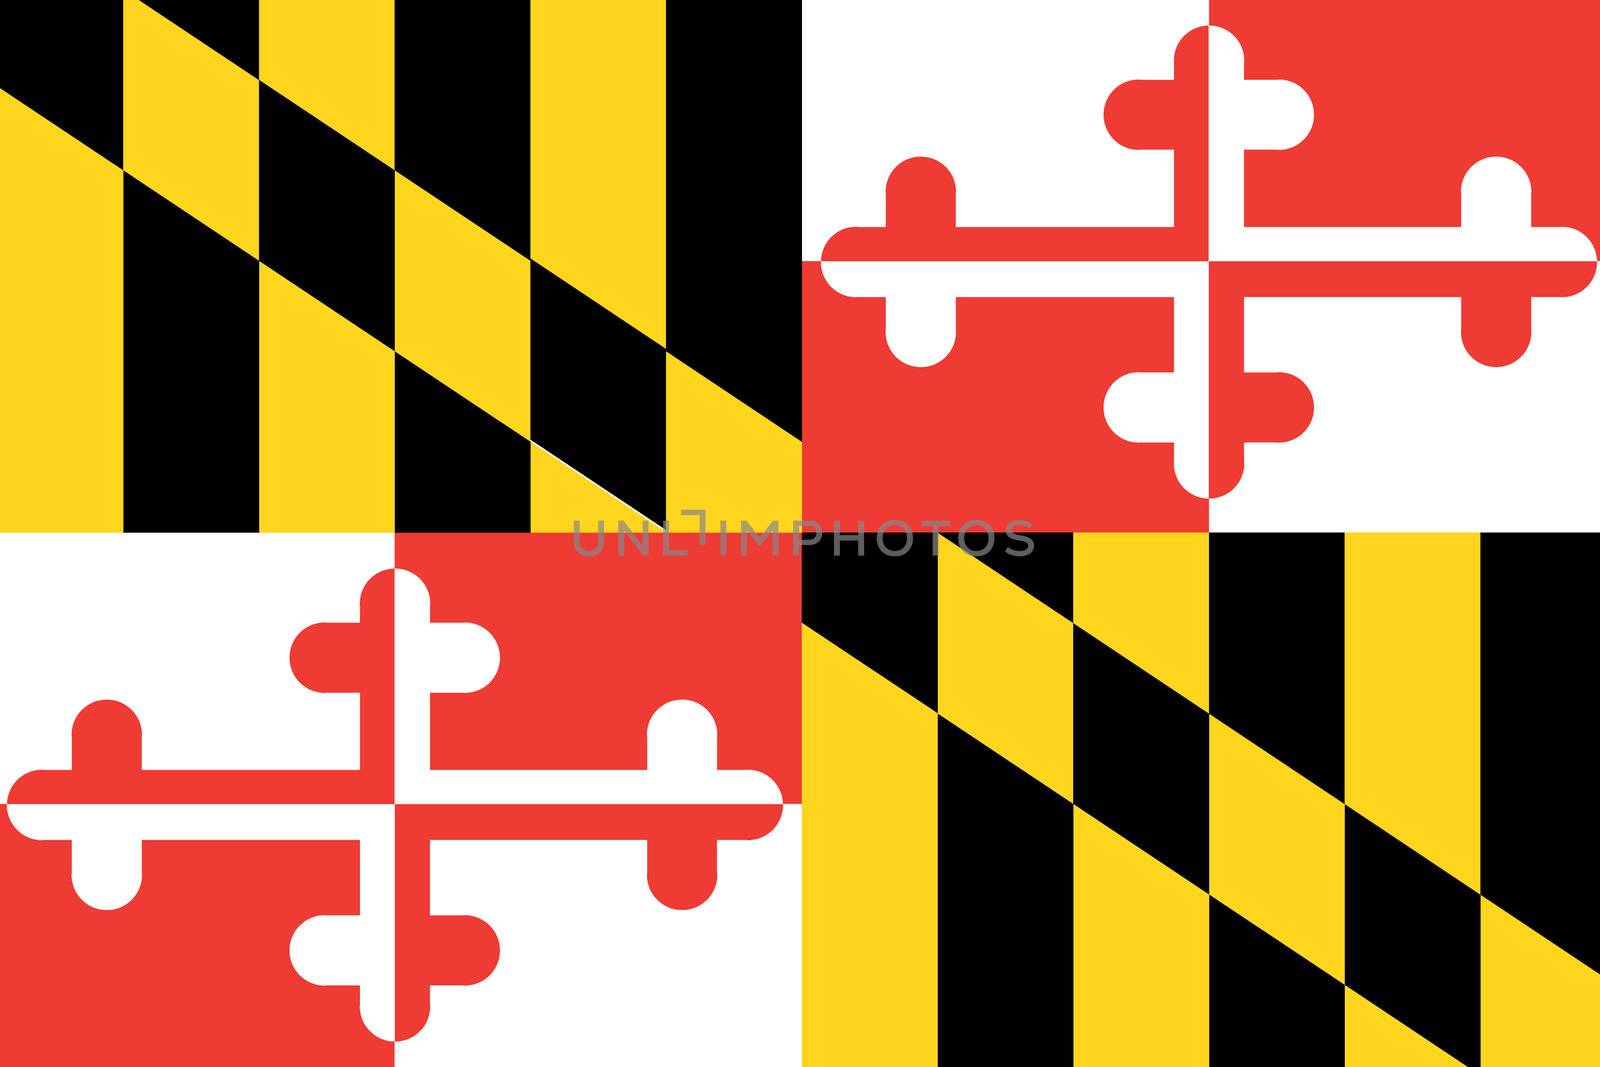 The Flag of the American State of Maryland